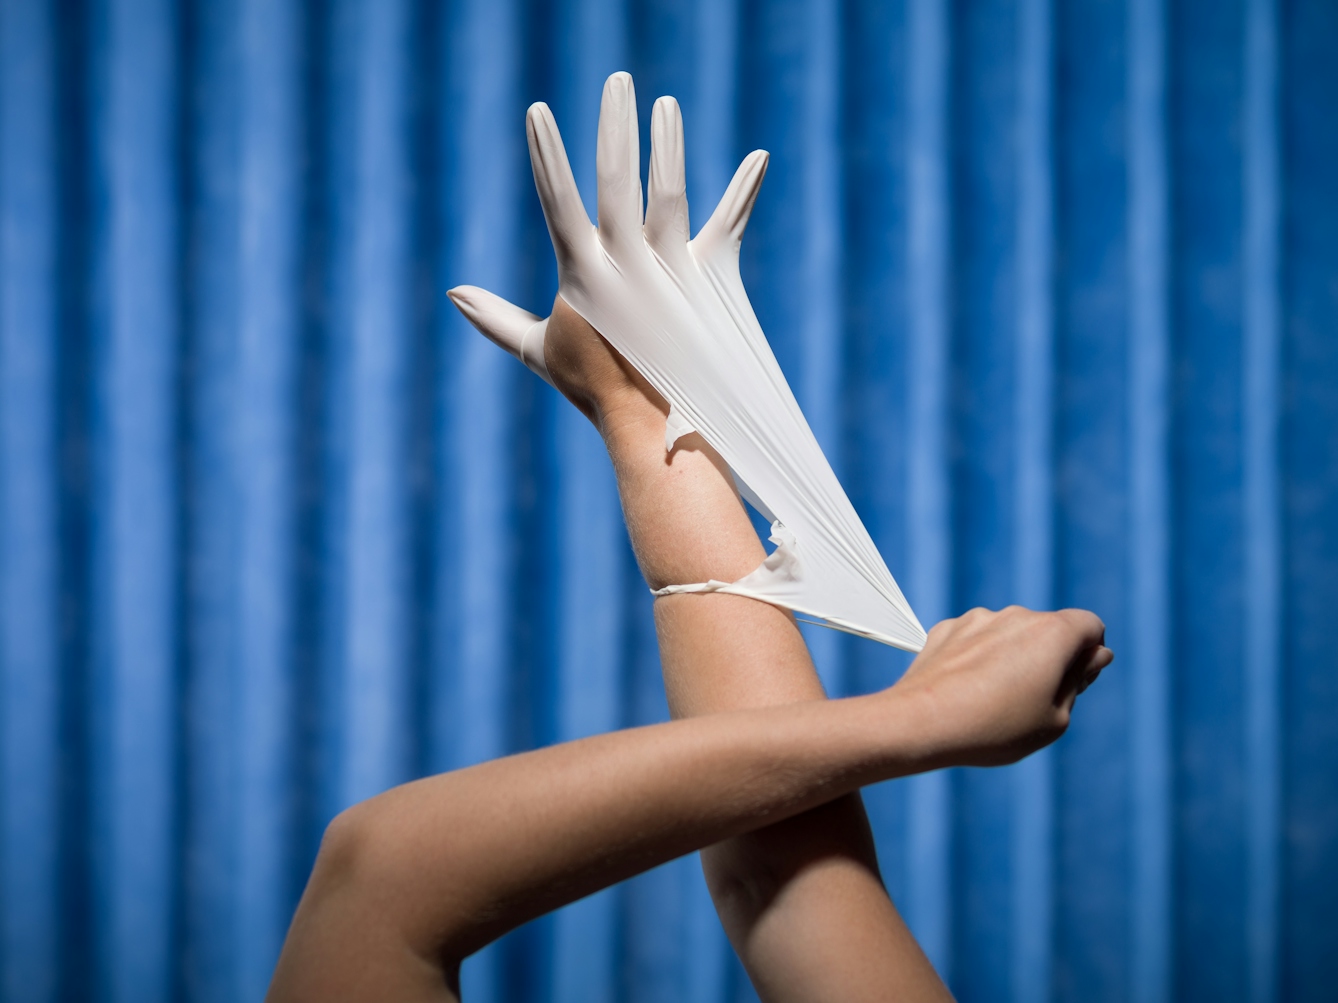 Photograph of a pair of hands, one hand is wearing a white latex glove, while the other stretches the cuff of the glove such that it is tearing. Photographed against a background of blue antibacterial clinical curtains.